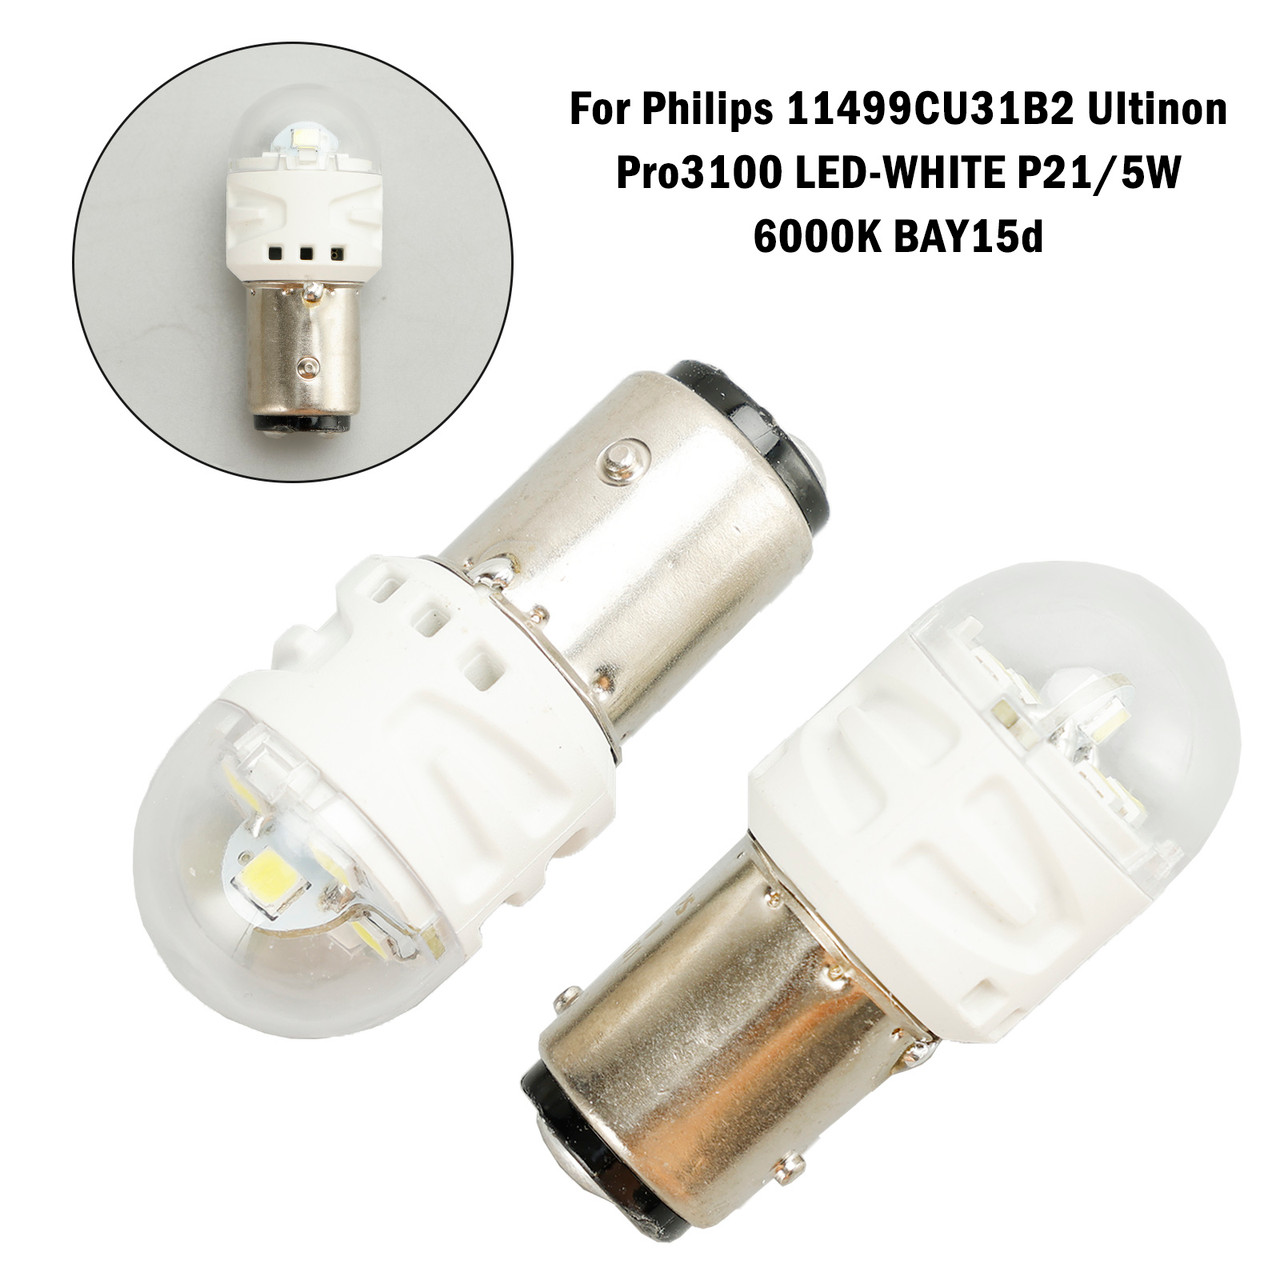 For Philips 11499CU31B2 Ultinon Pro3100 LED-WHITE P21/5W 6000K BAY15d